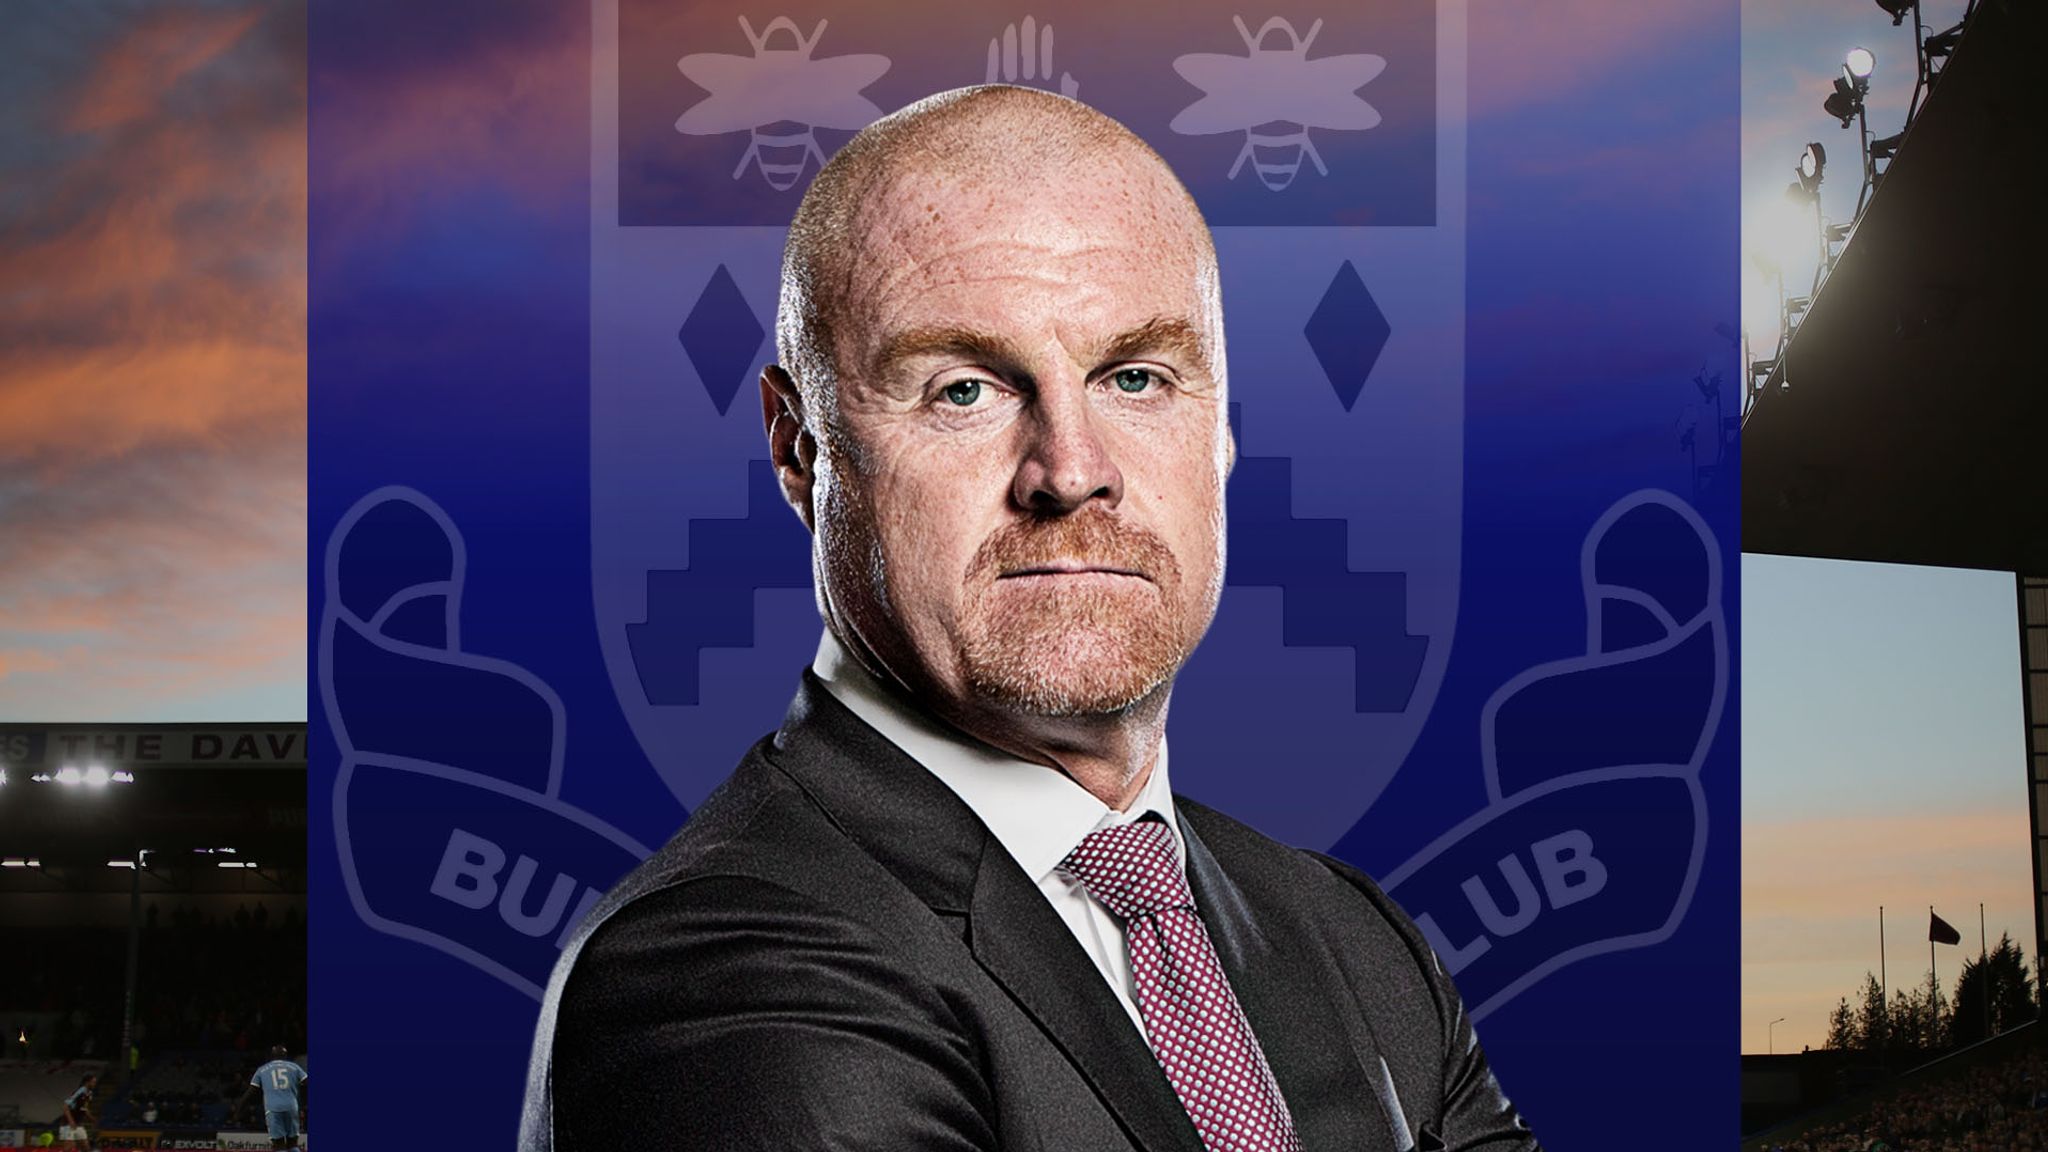  Burnley manager Sean Dyche is seen in front of a blue background with a crest on the left and a floodlit stadium on the right.